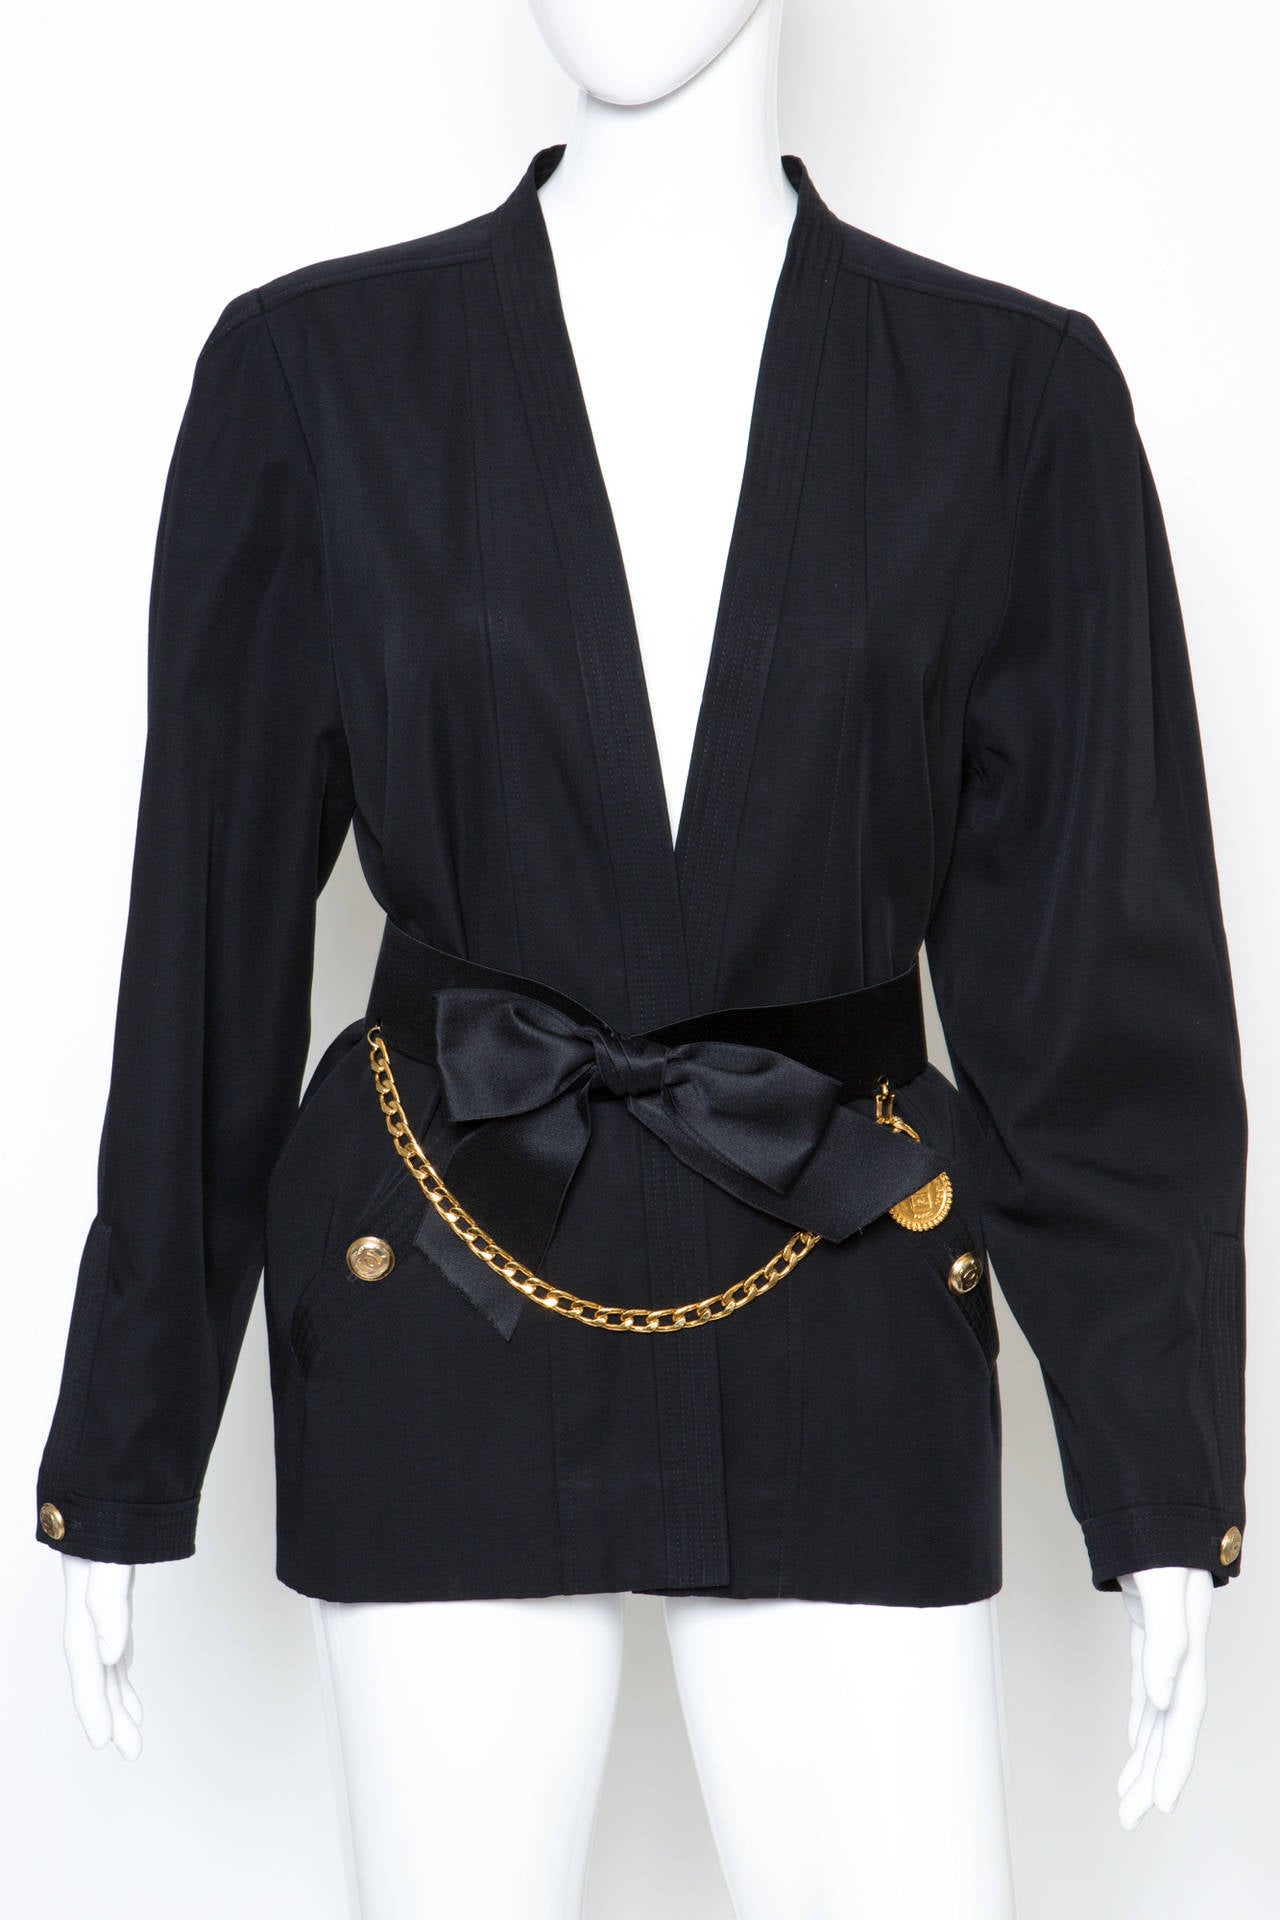 Gorgeous black wool kimono-style jacket from Chanel featuring an open front, front button pockets, fully lined, long sleeves and button cuffs. The jacket comes with a  black Chanel front satin silk bow detail, a logo charm and a detachable gold-tone